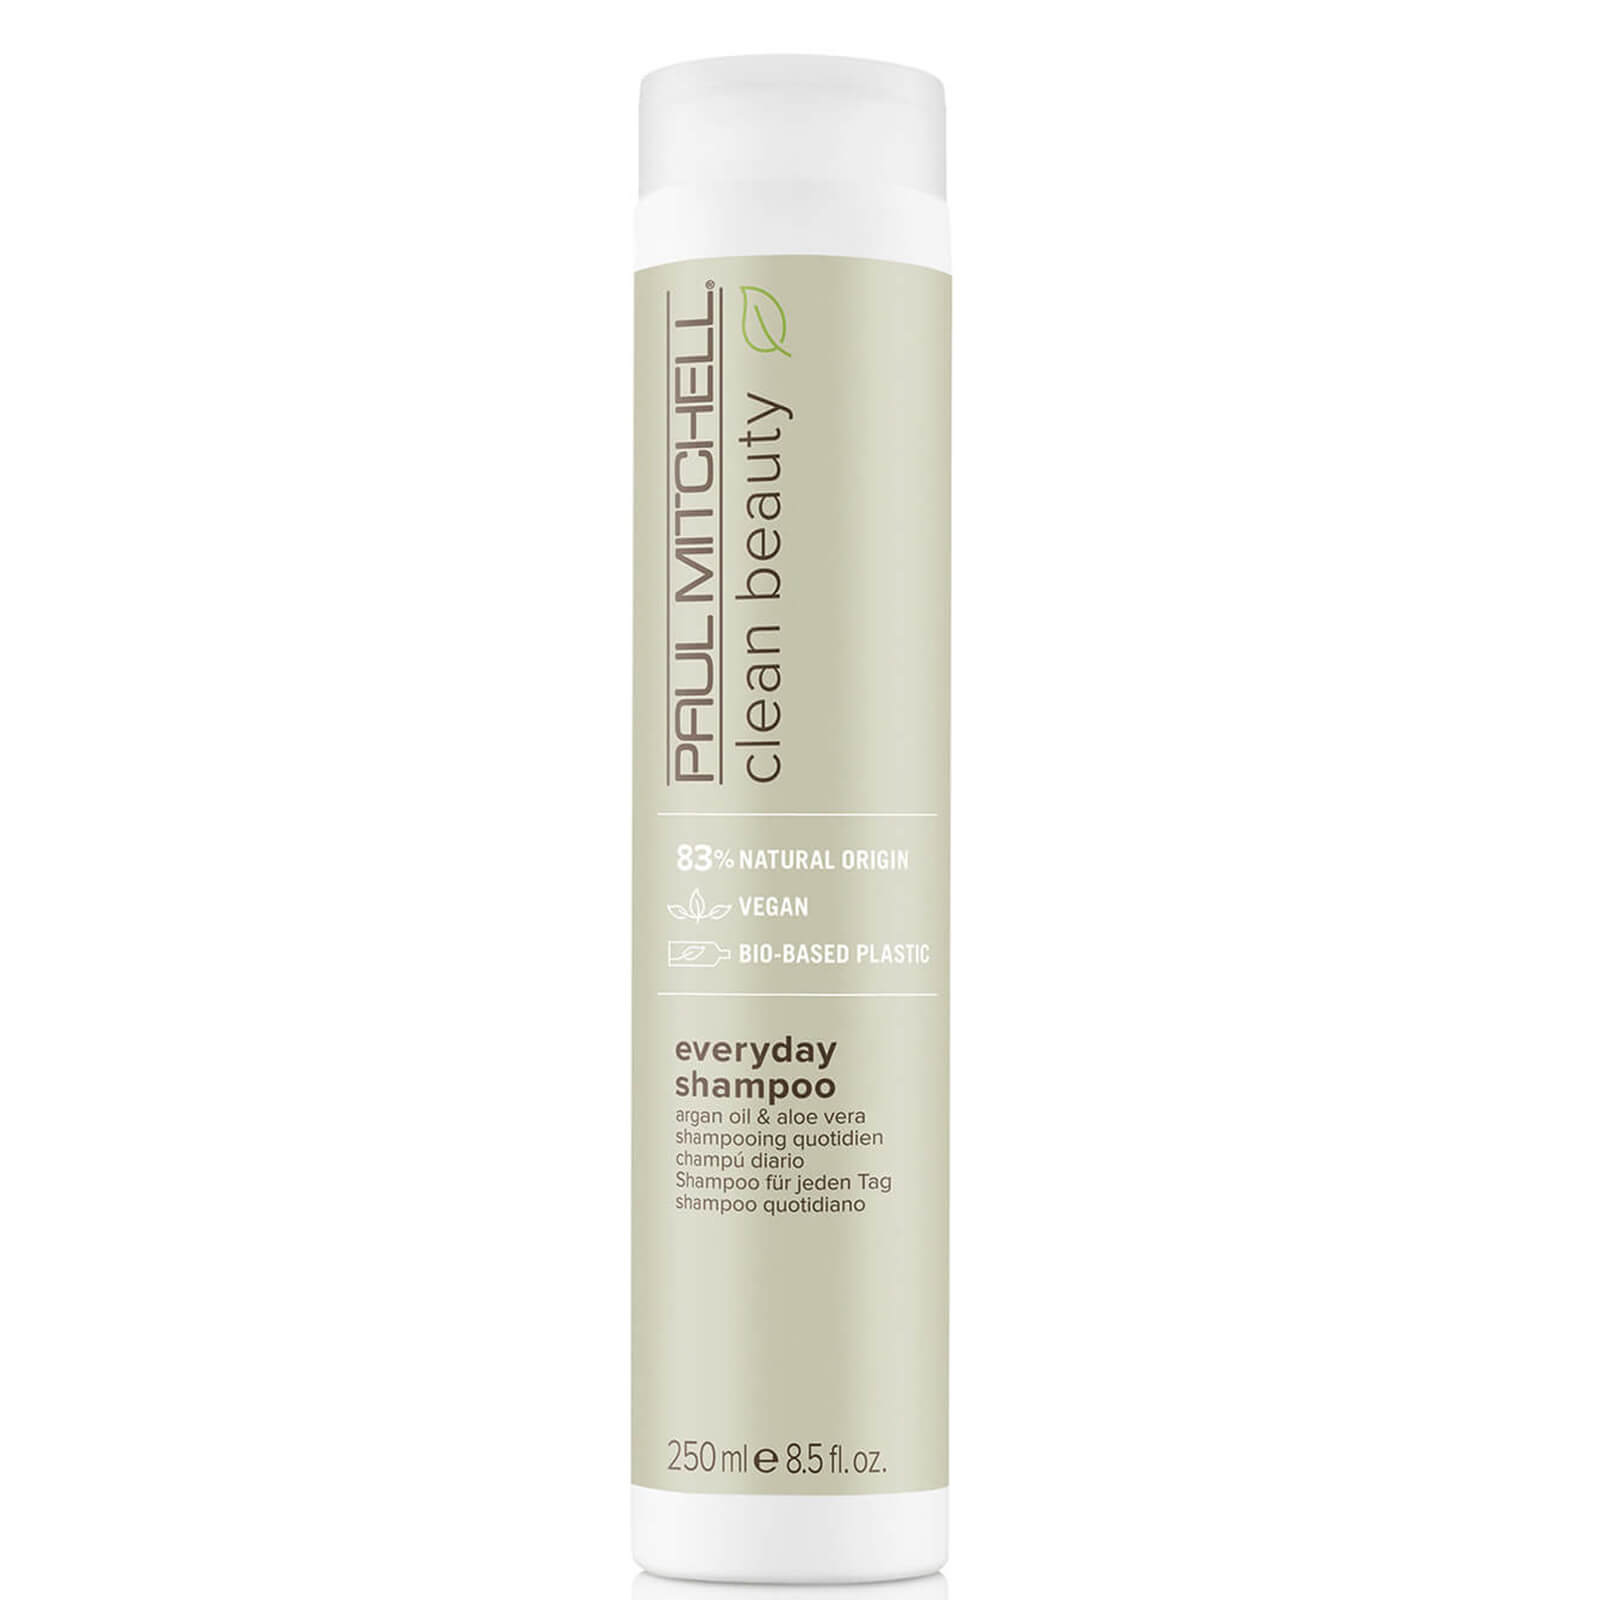 Paul Mitchell Clean Beauty Everyday Shampoo 250ml In White